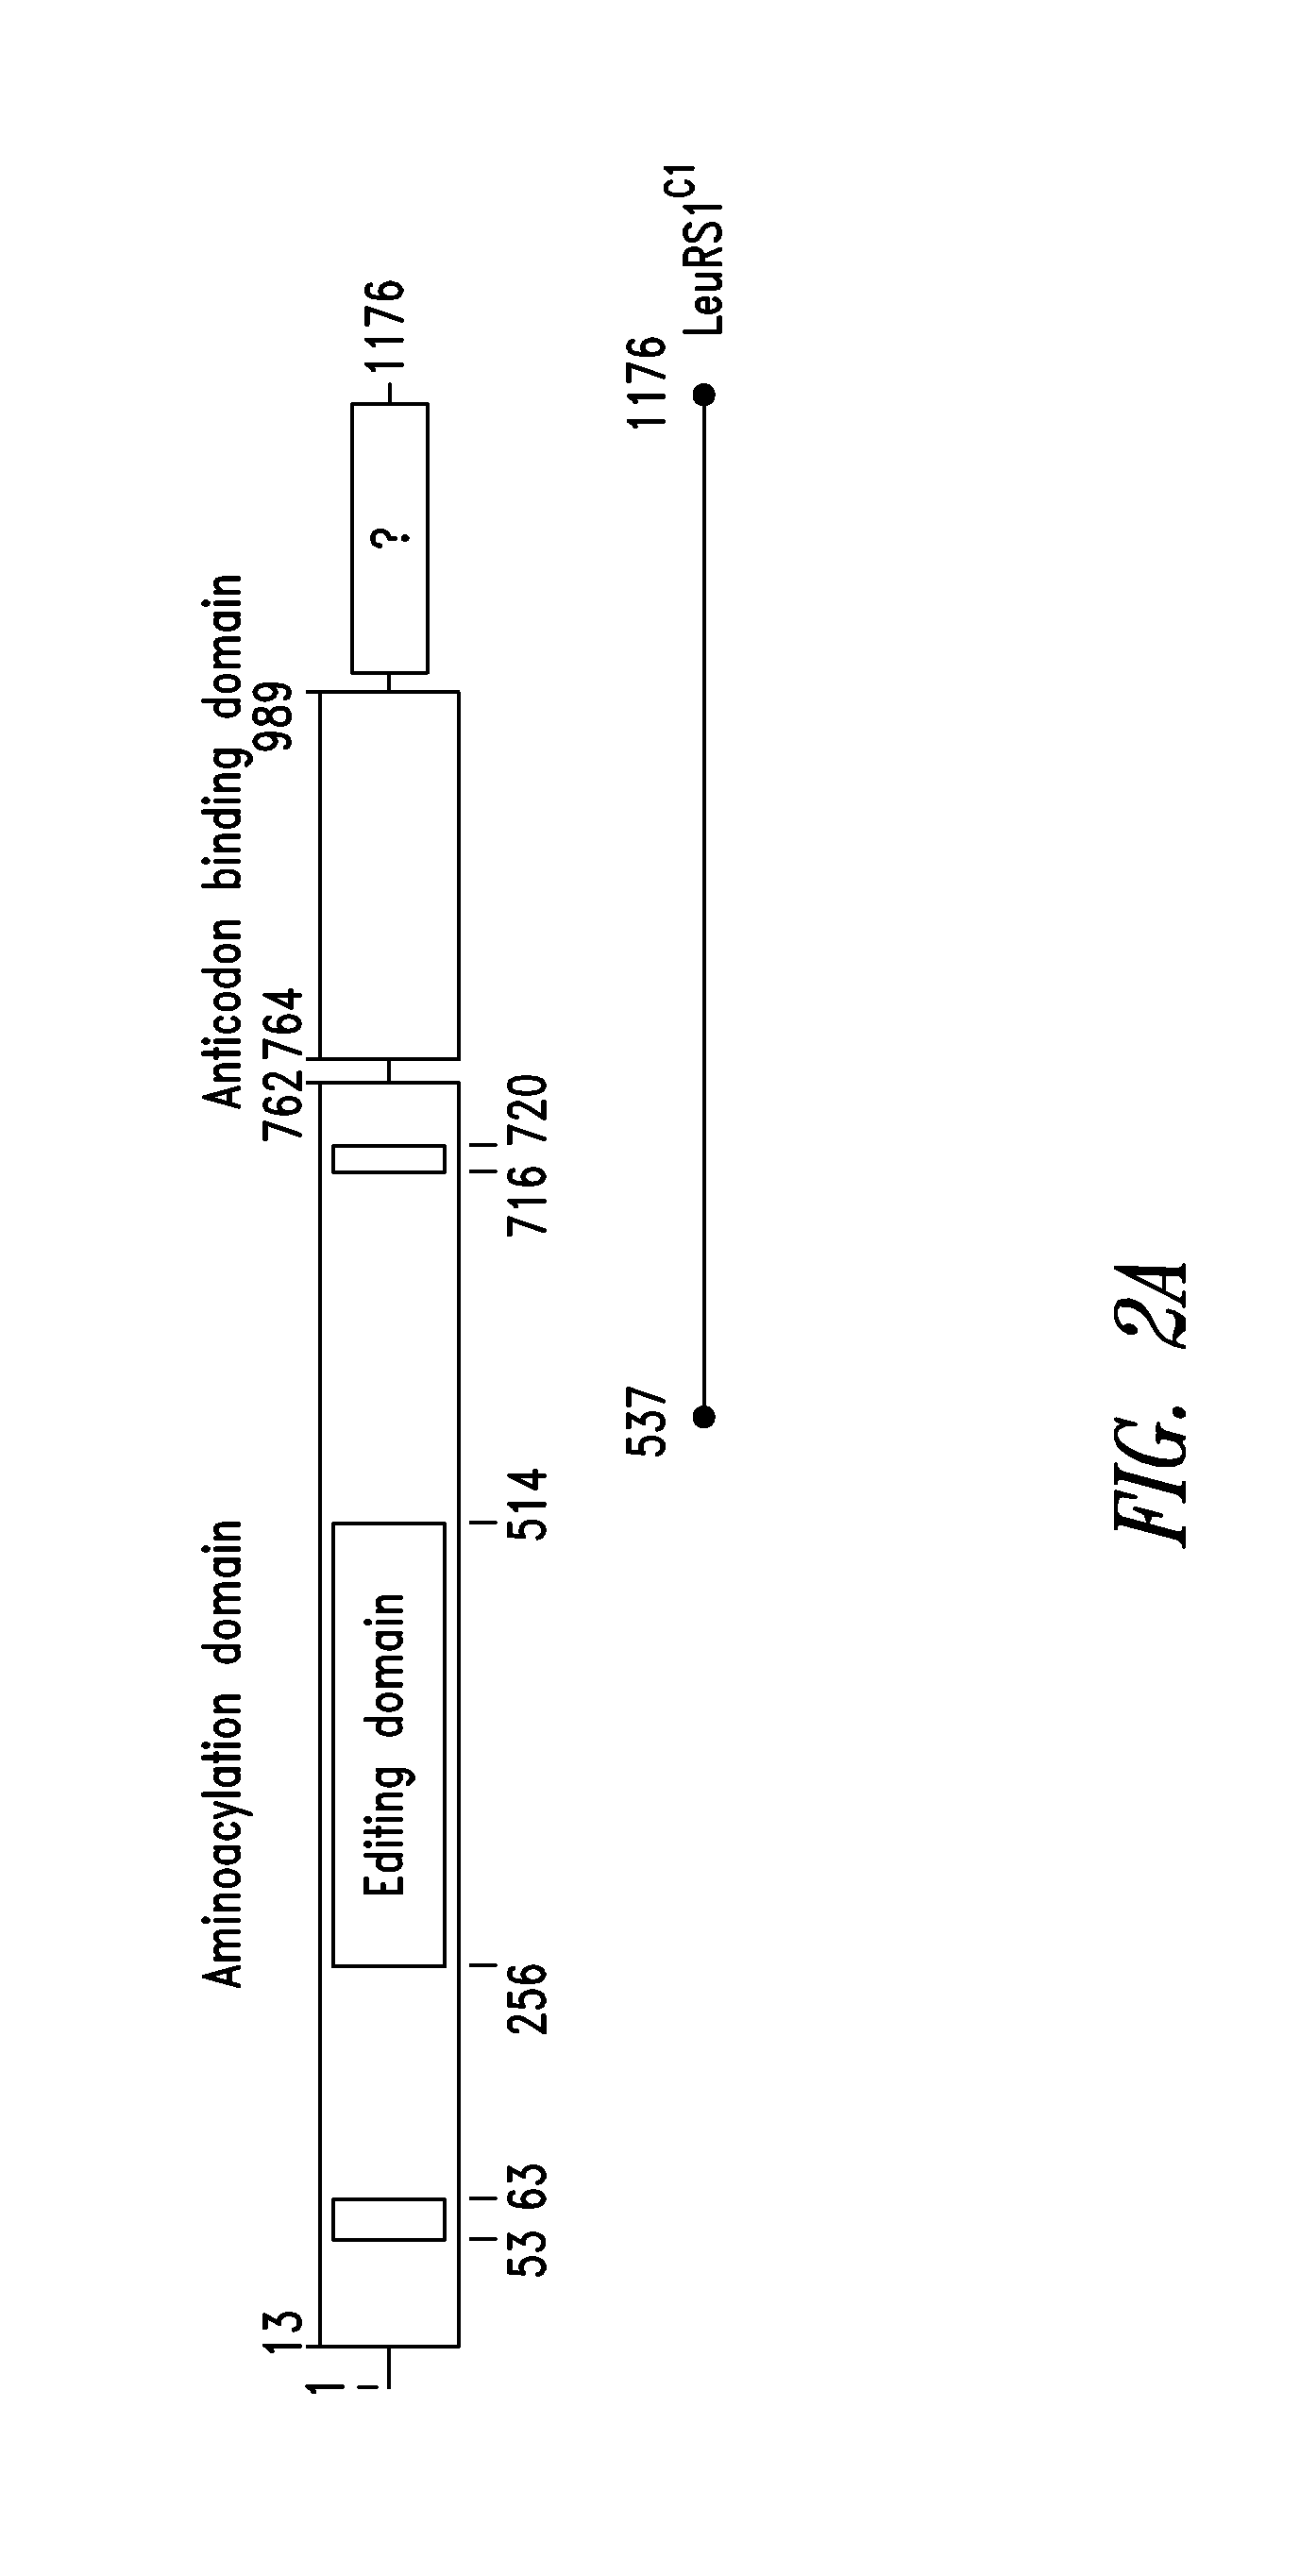 Innovative discovery of therapeutic, diagnostic, and antibody compositions related to protein fragments of leucyl-trna synthetases